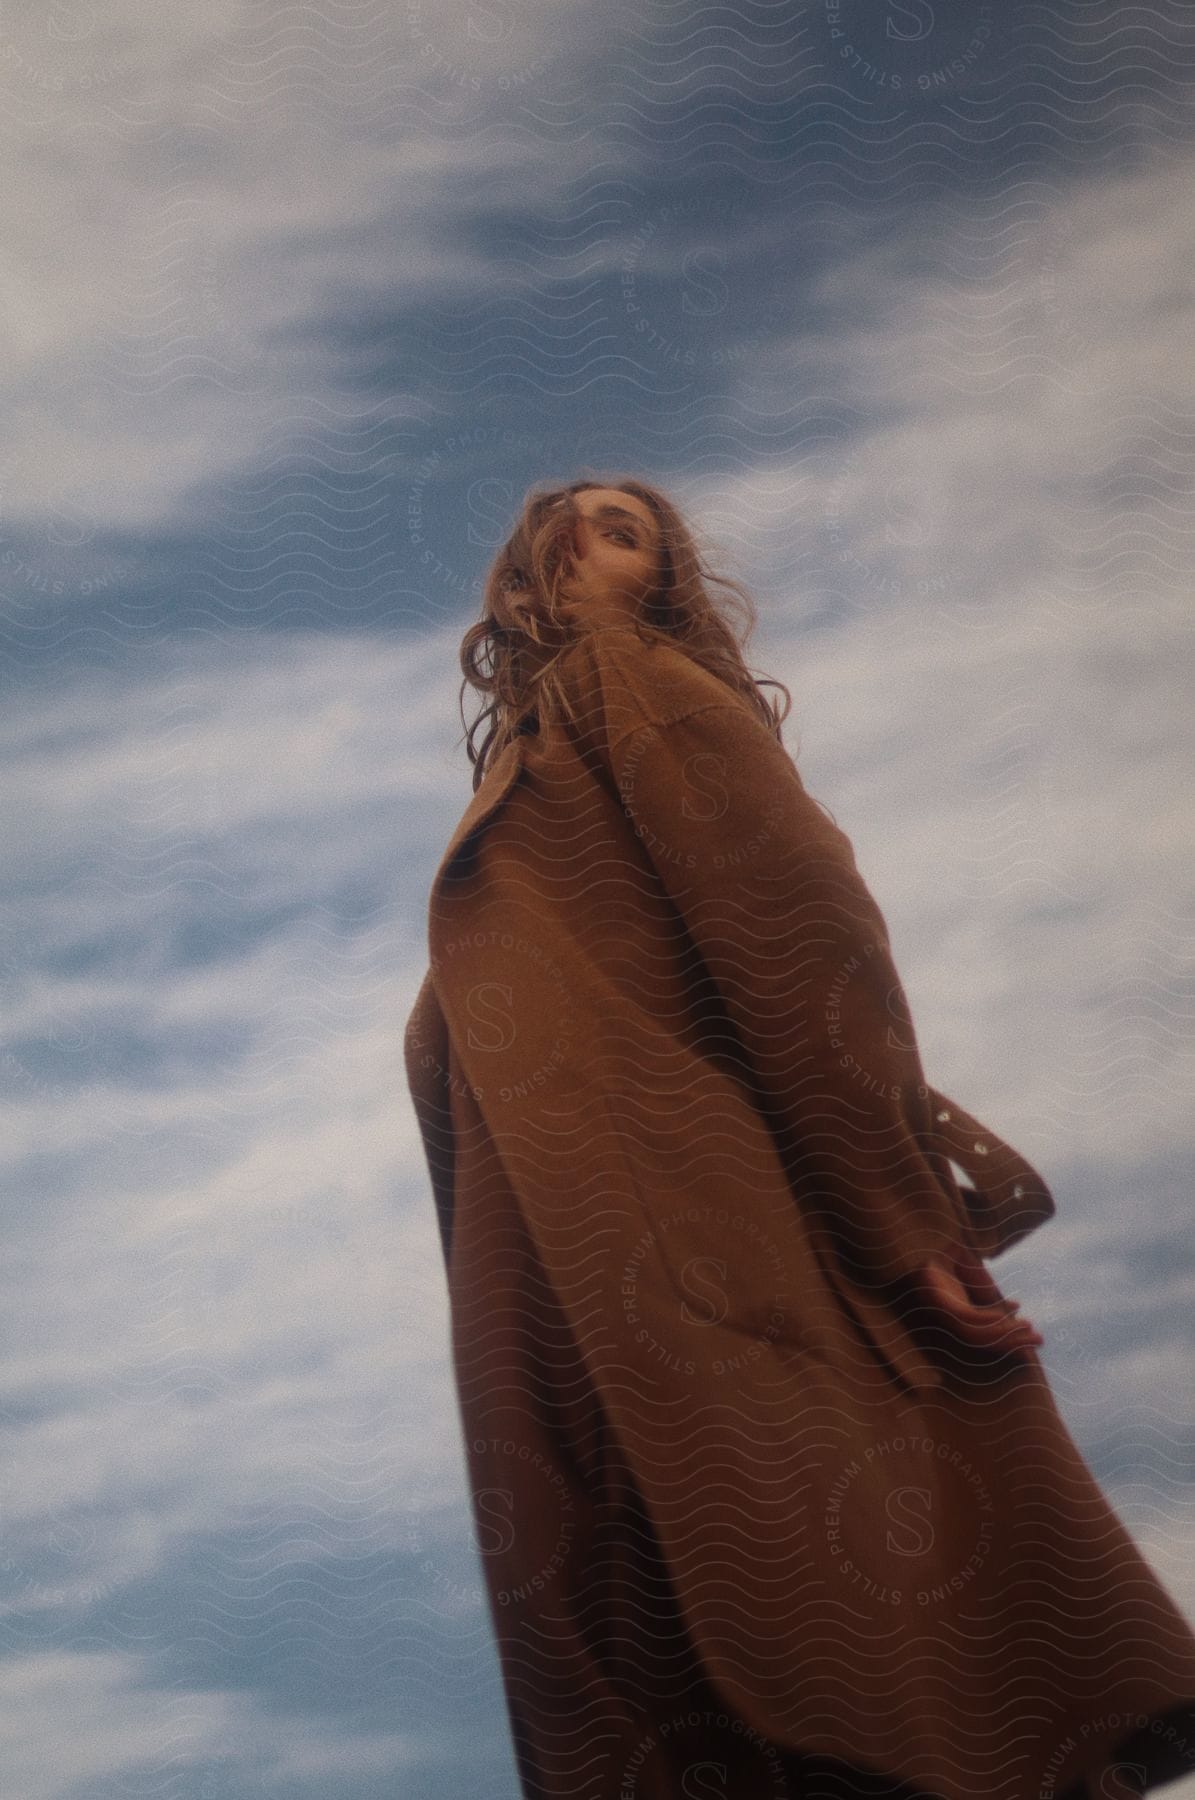 A young woman poses in a long brown coat with cloudy skies in the background.